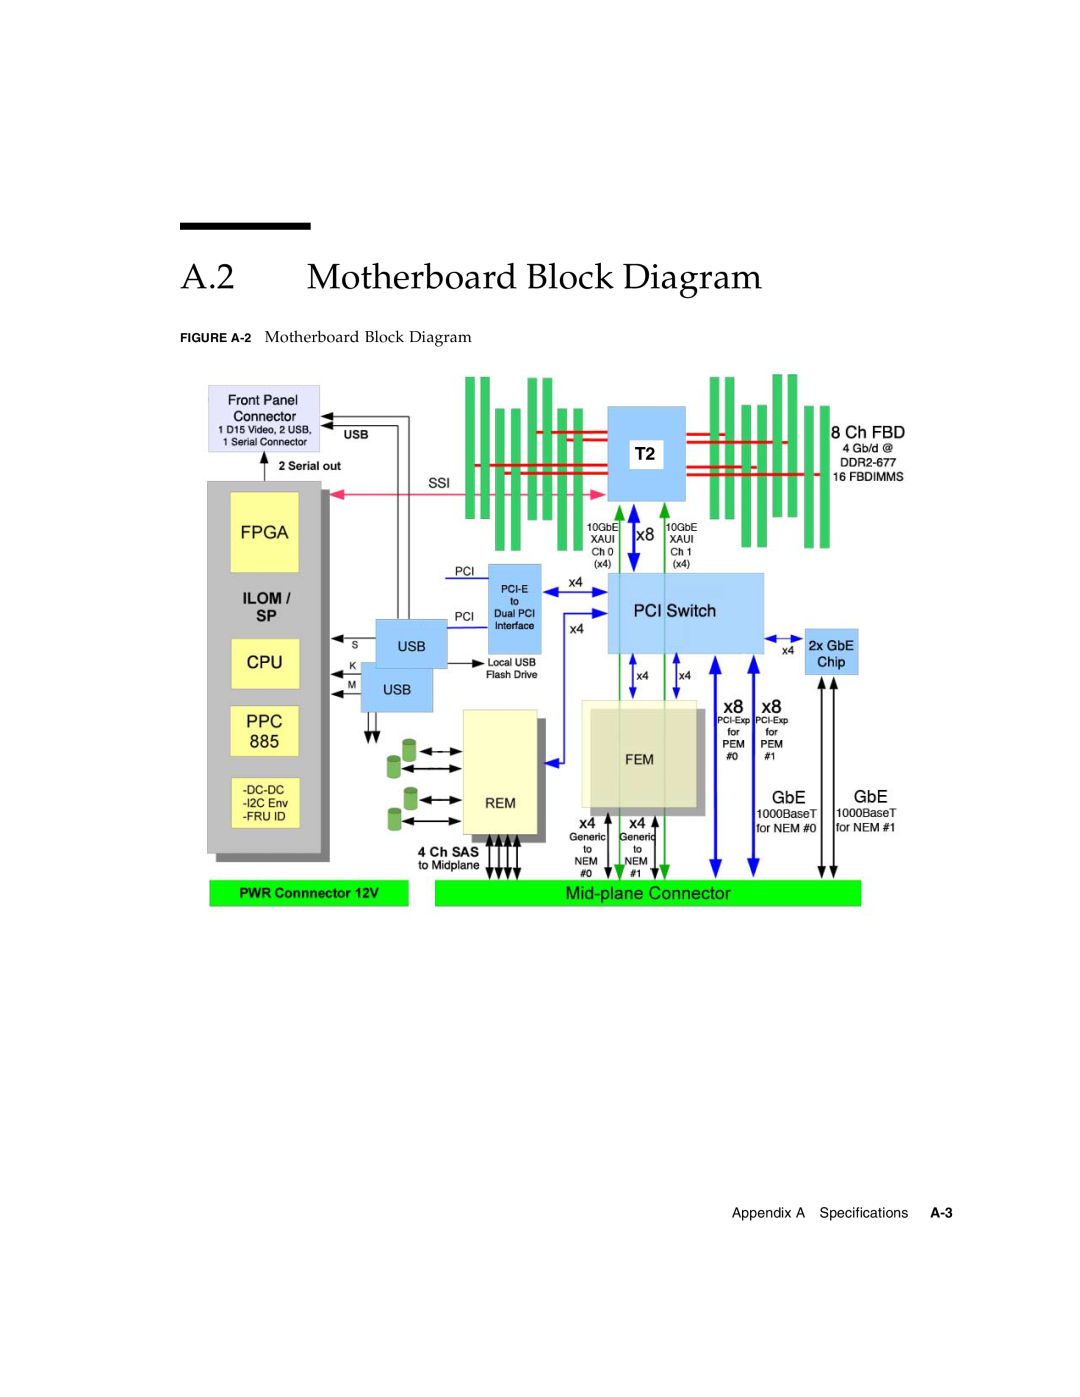 Sun Microsystems T6320 service manual A.2 Motherboard Block Diagram, Appendix A Specifications A-3 